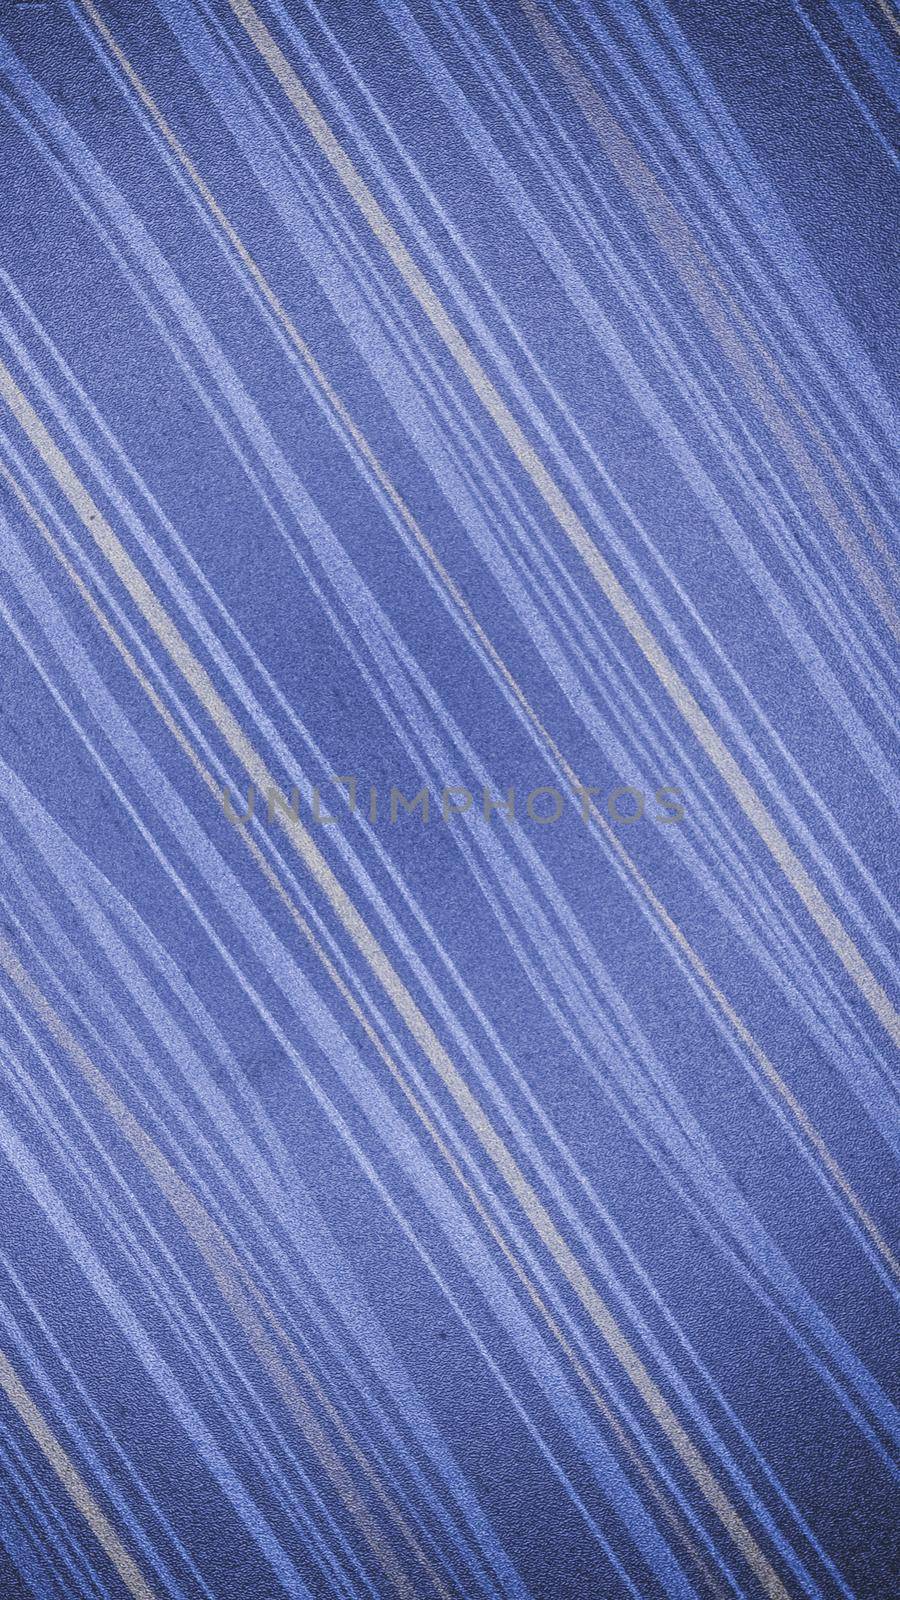 Vertical stripe pattern design. Seamless thin and thick linear geometric blue white backdrop. Abstract background. by sudiptabhowmick